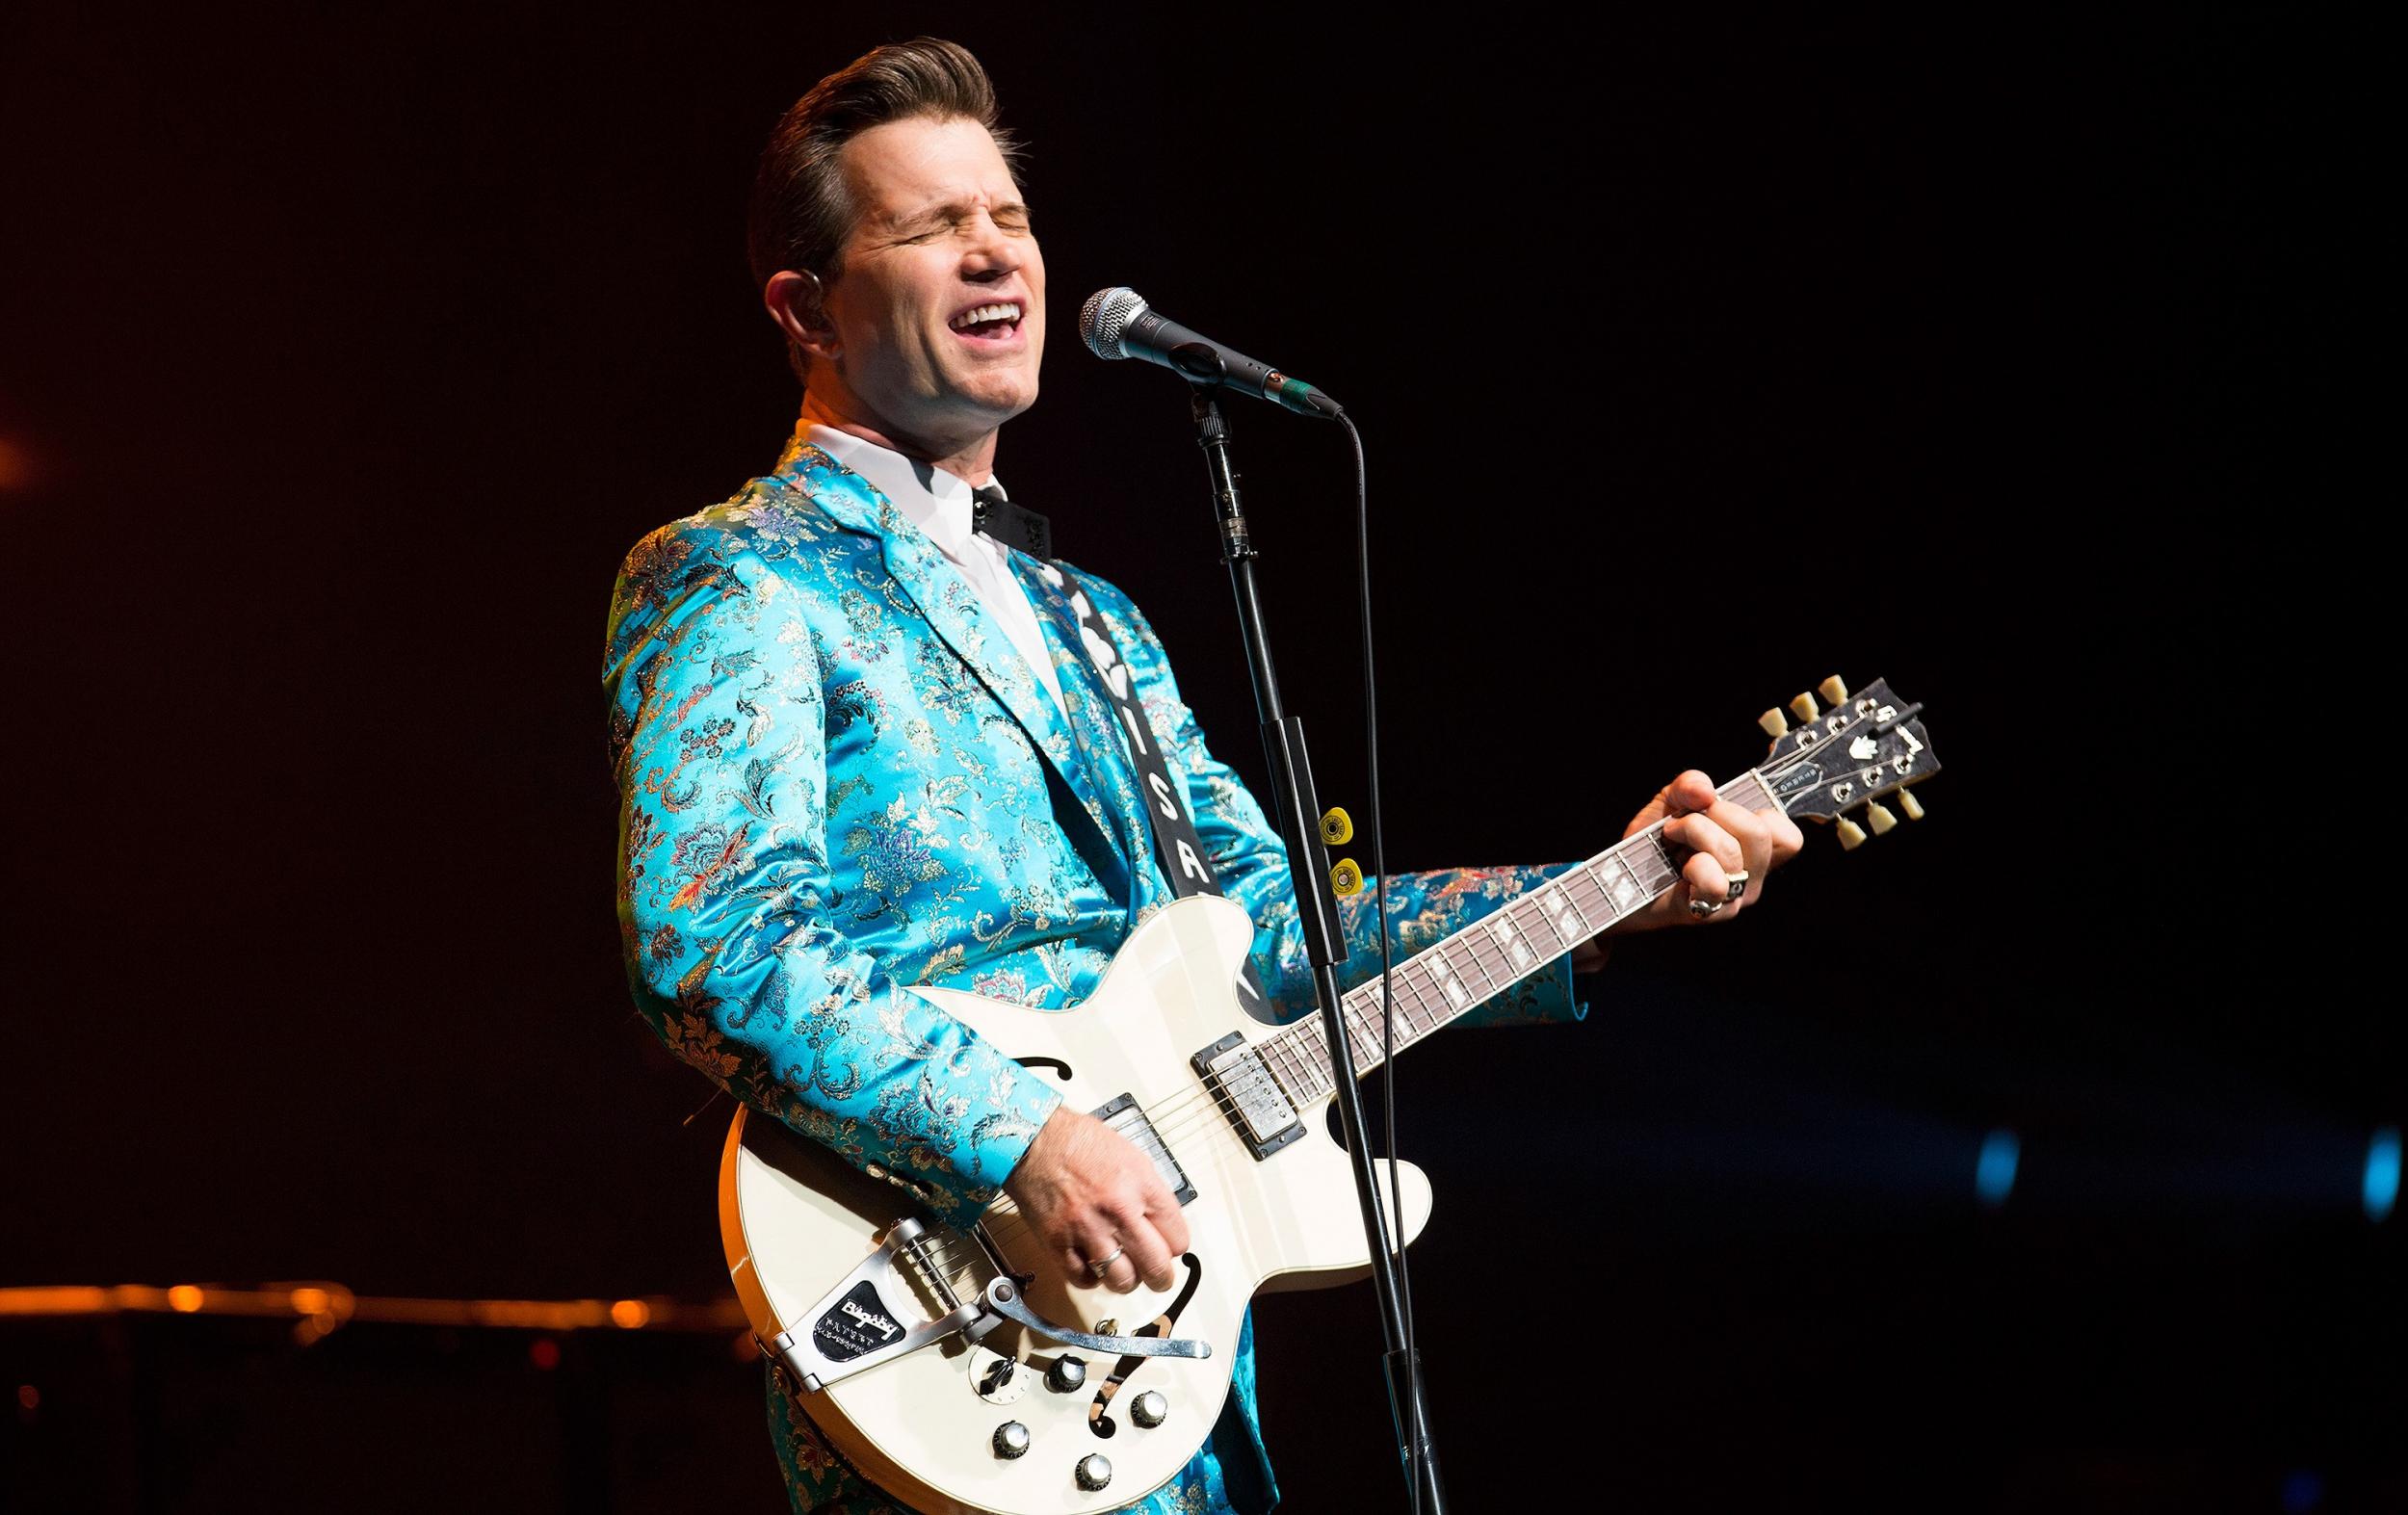 Chris Isaak has been singing about heartache for nearly 30 years and